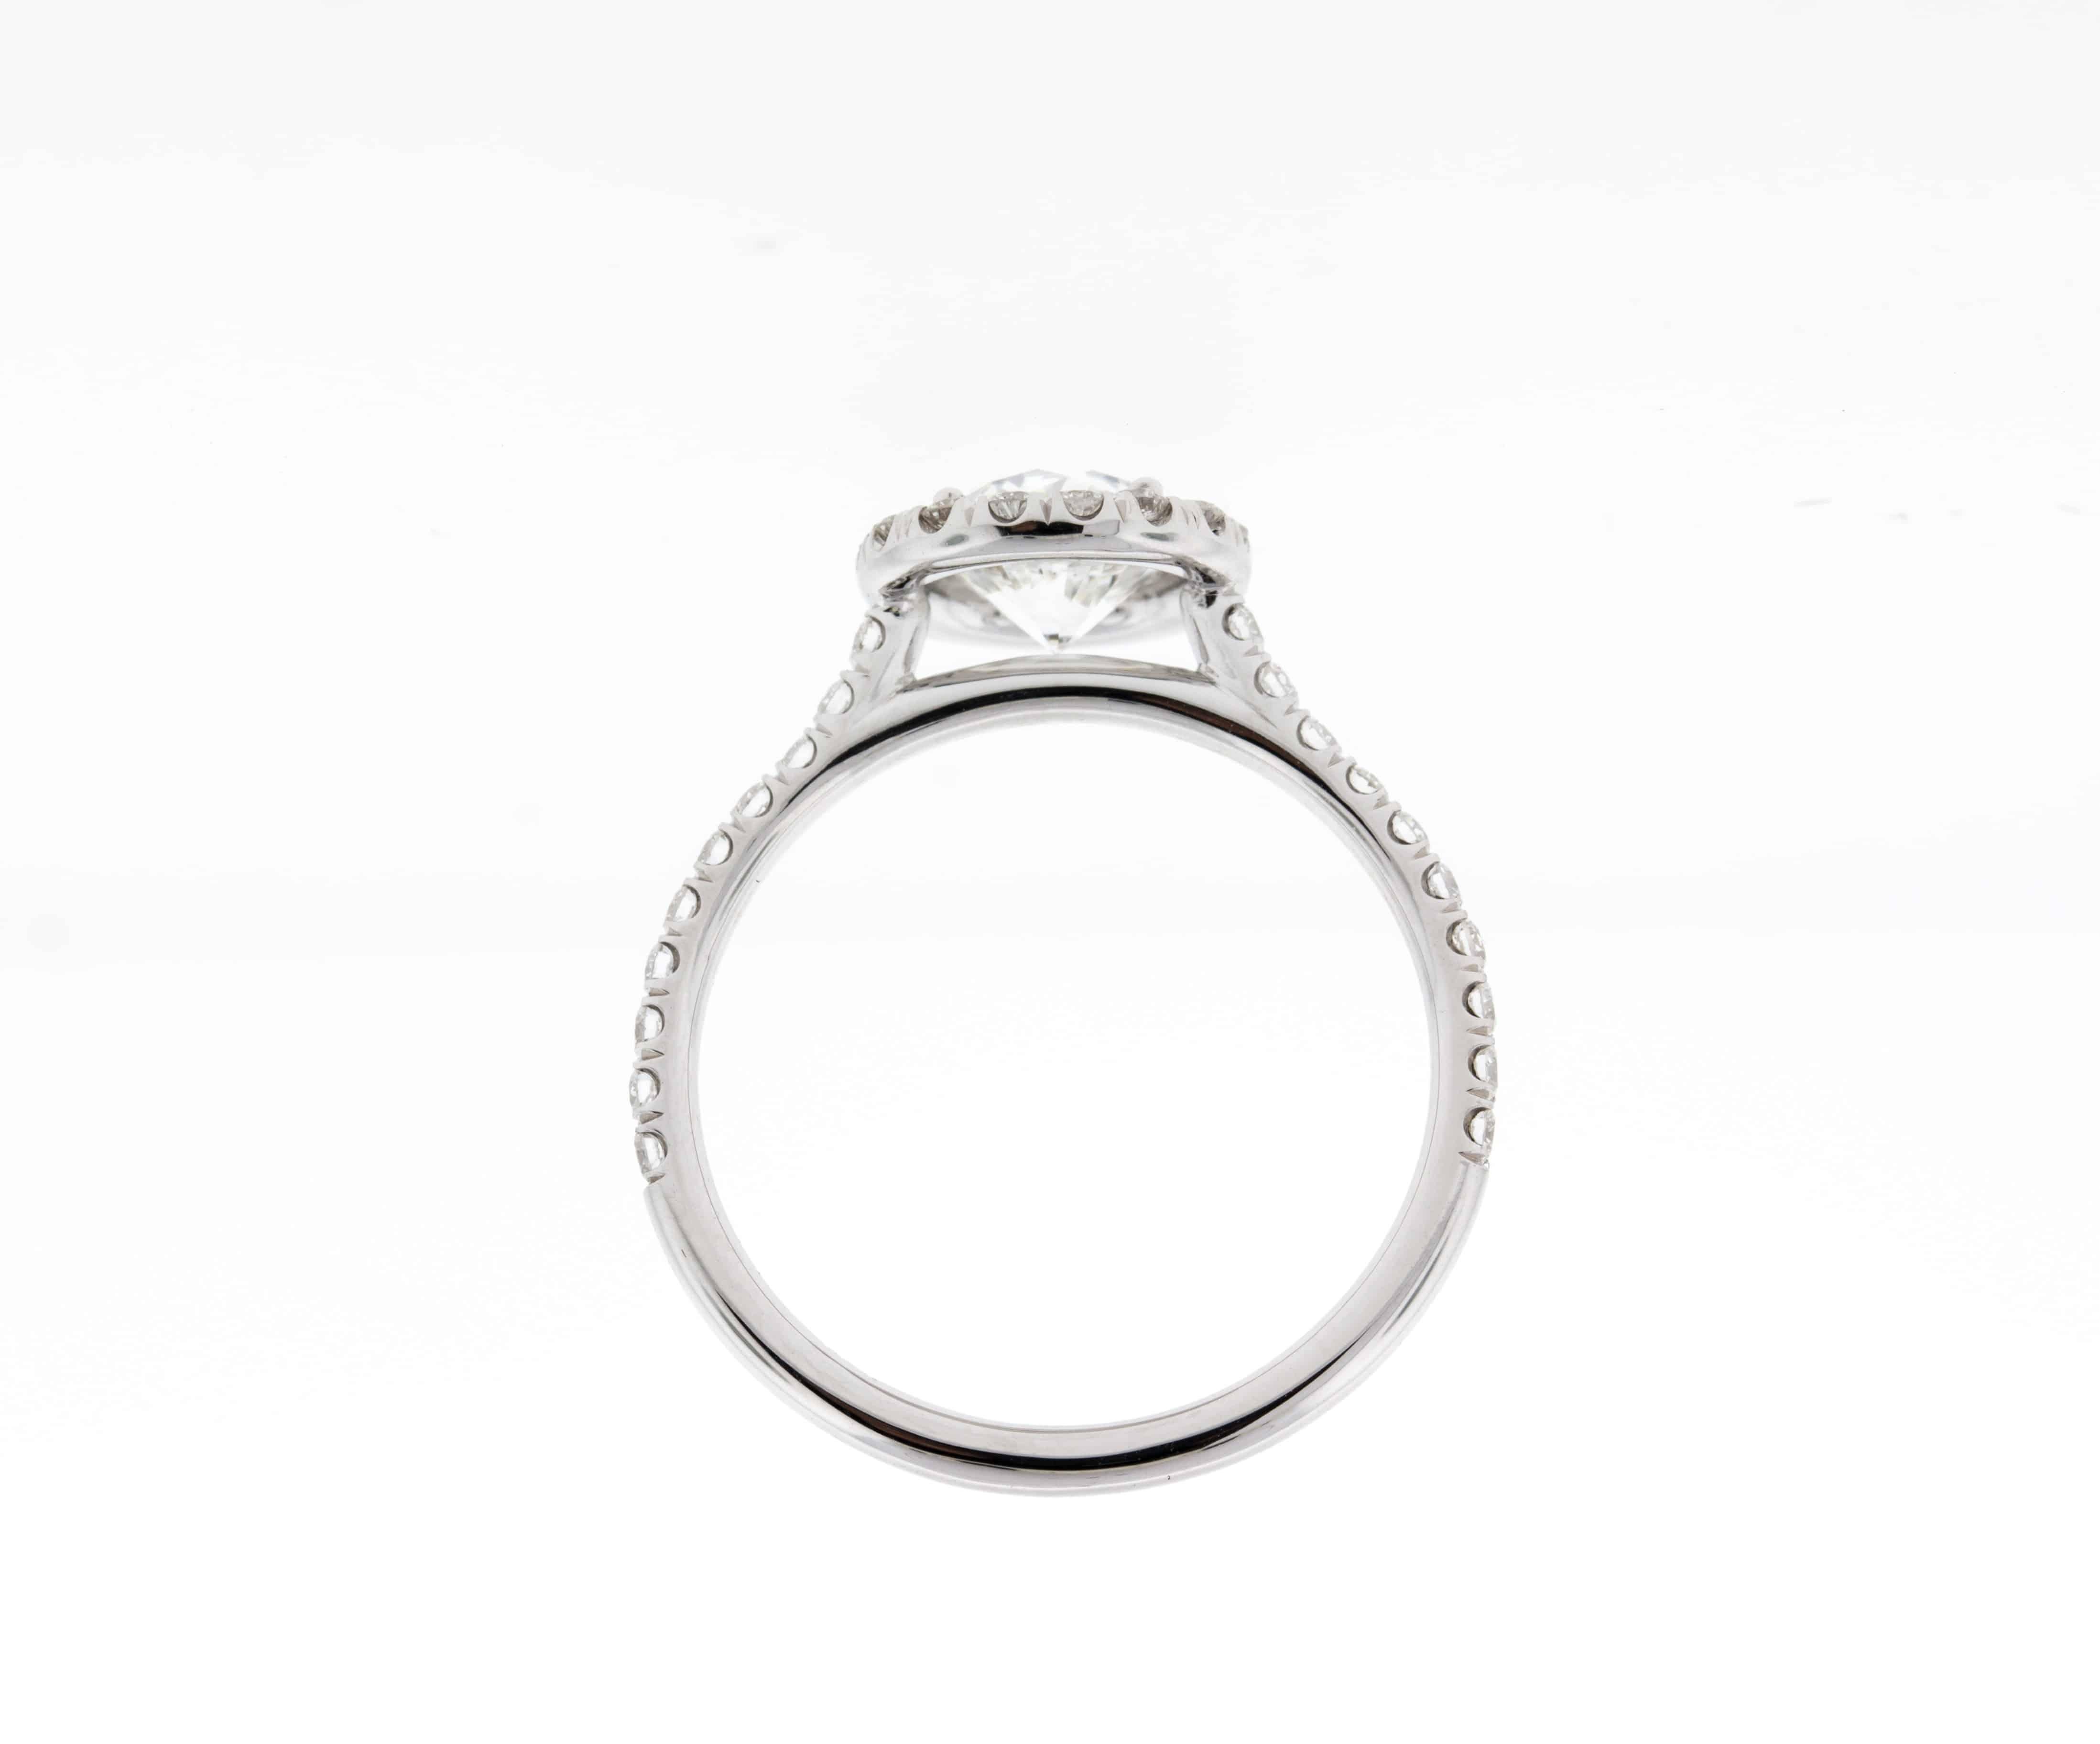 This custom diamond engagement ring features a round diamond with a built-in (cathedral style) setting with a matching diamond halo and u-pave diamonds 3/4 of the way down the band, this engagement ring can be made in any color gold or in platinum.